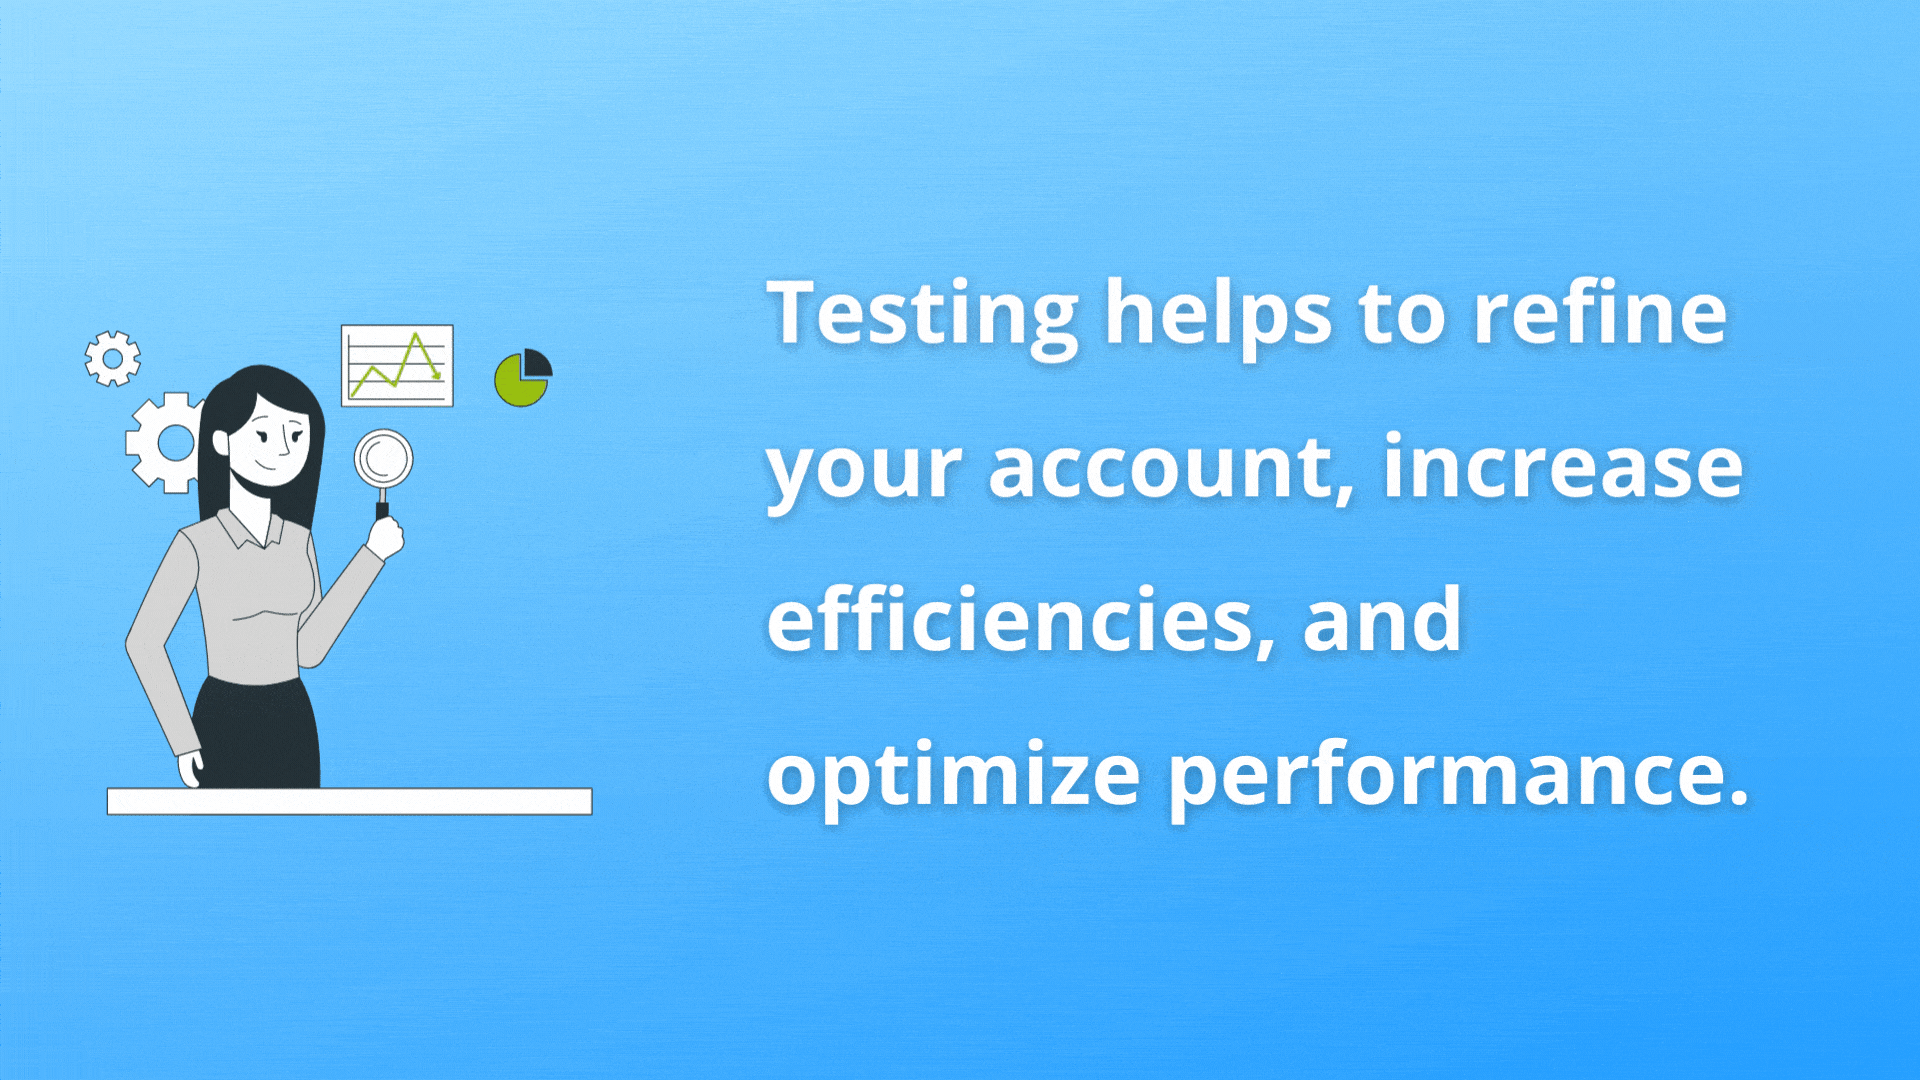 Testing in Google Ads helps optimize performance